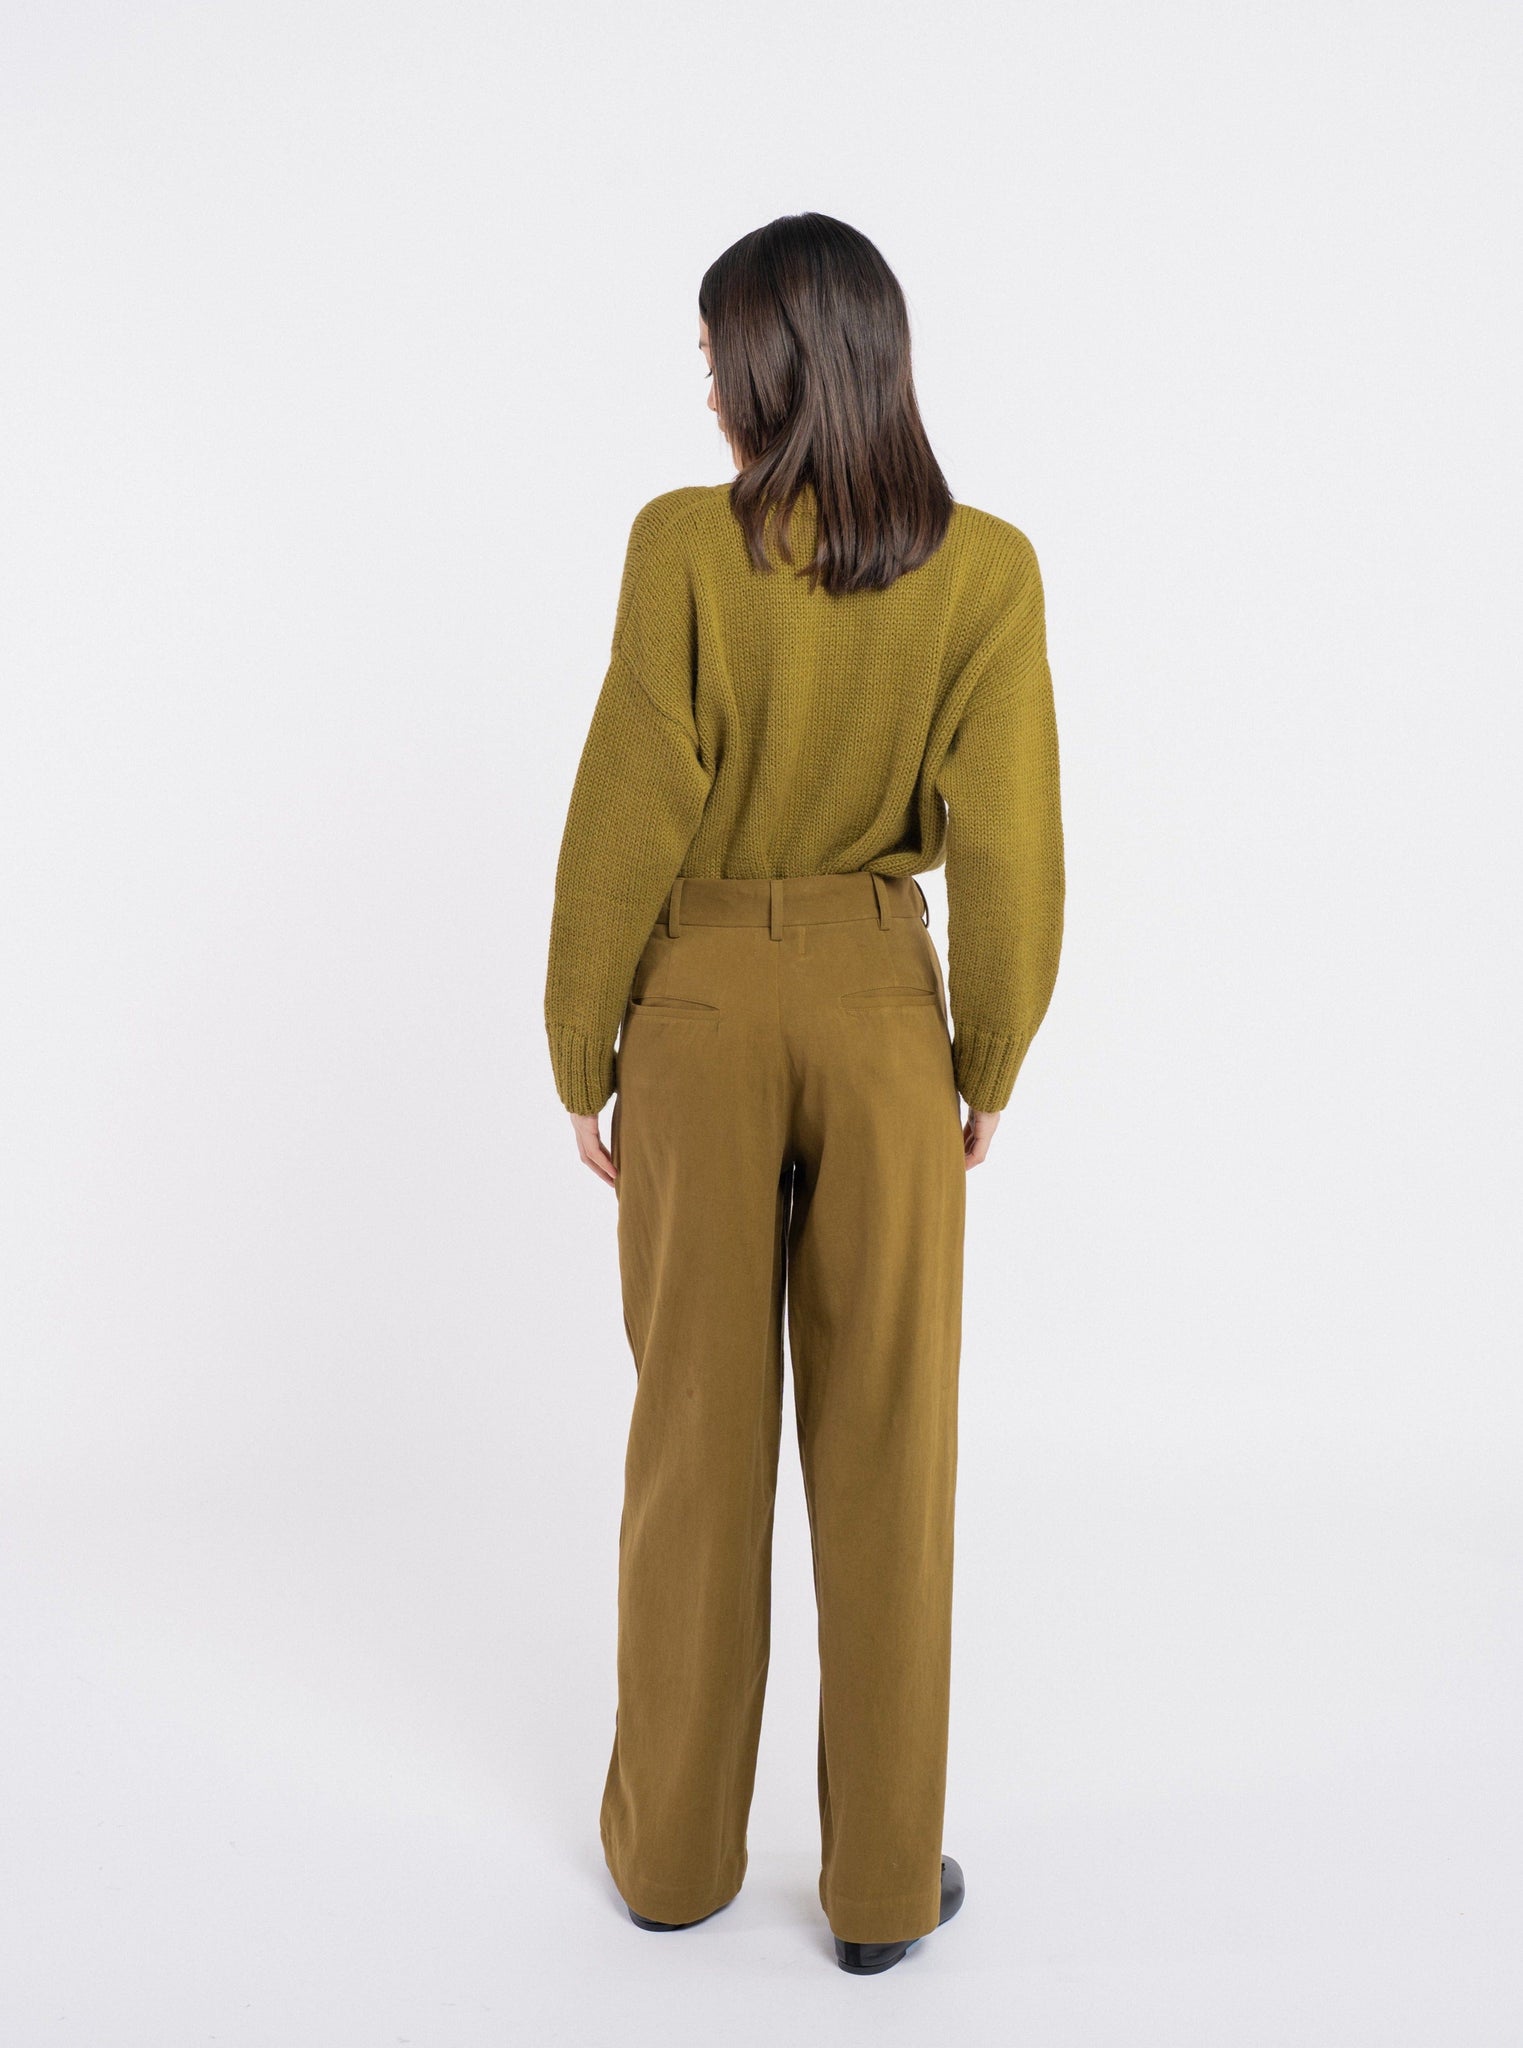 The back view of a woman wearing the Alfred Trouser - Olive.